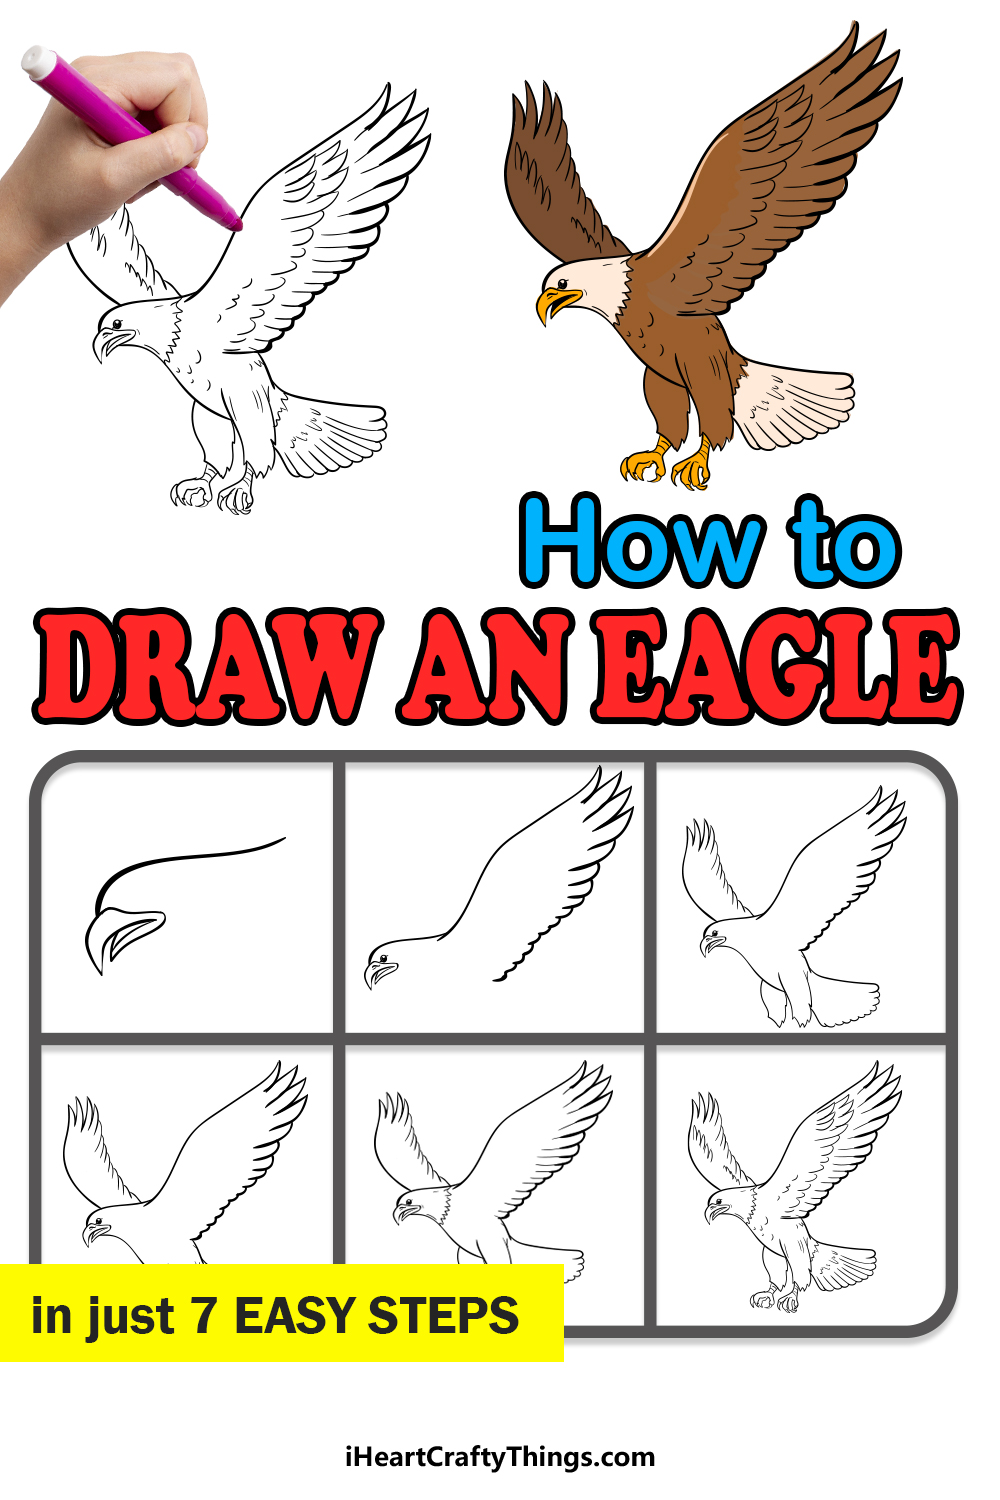 how to lớn draw an eagle in 7 easy steps